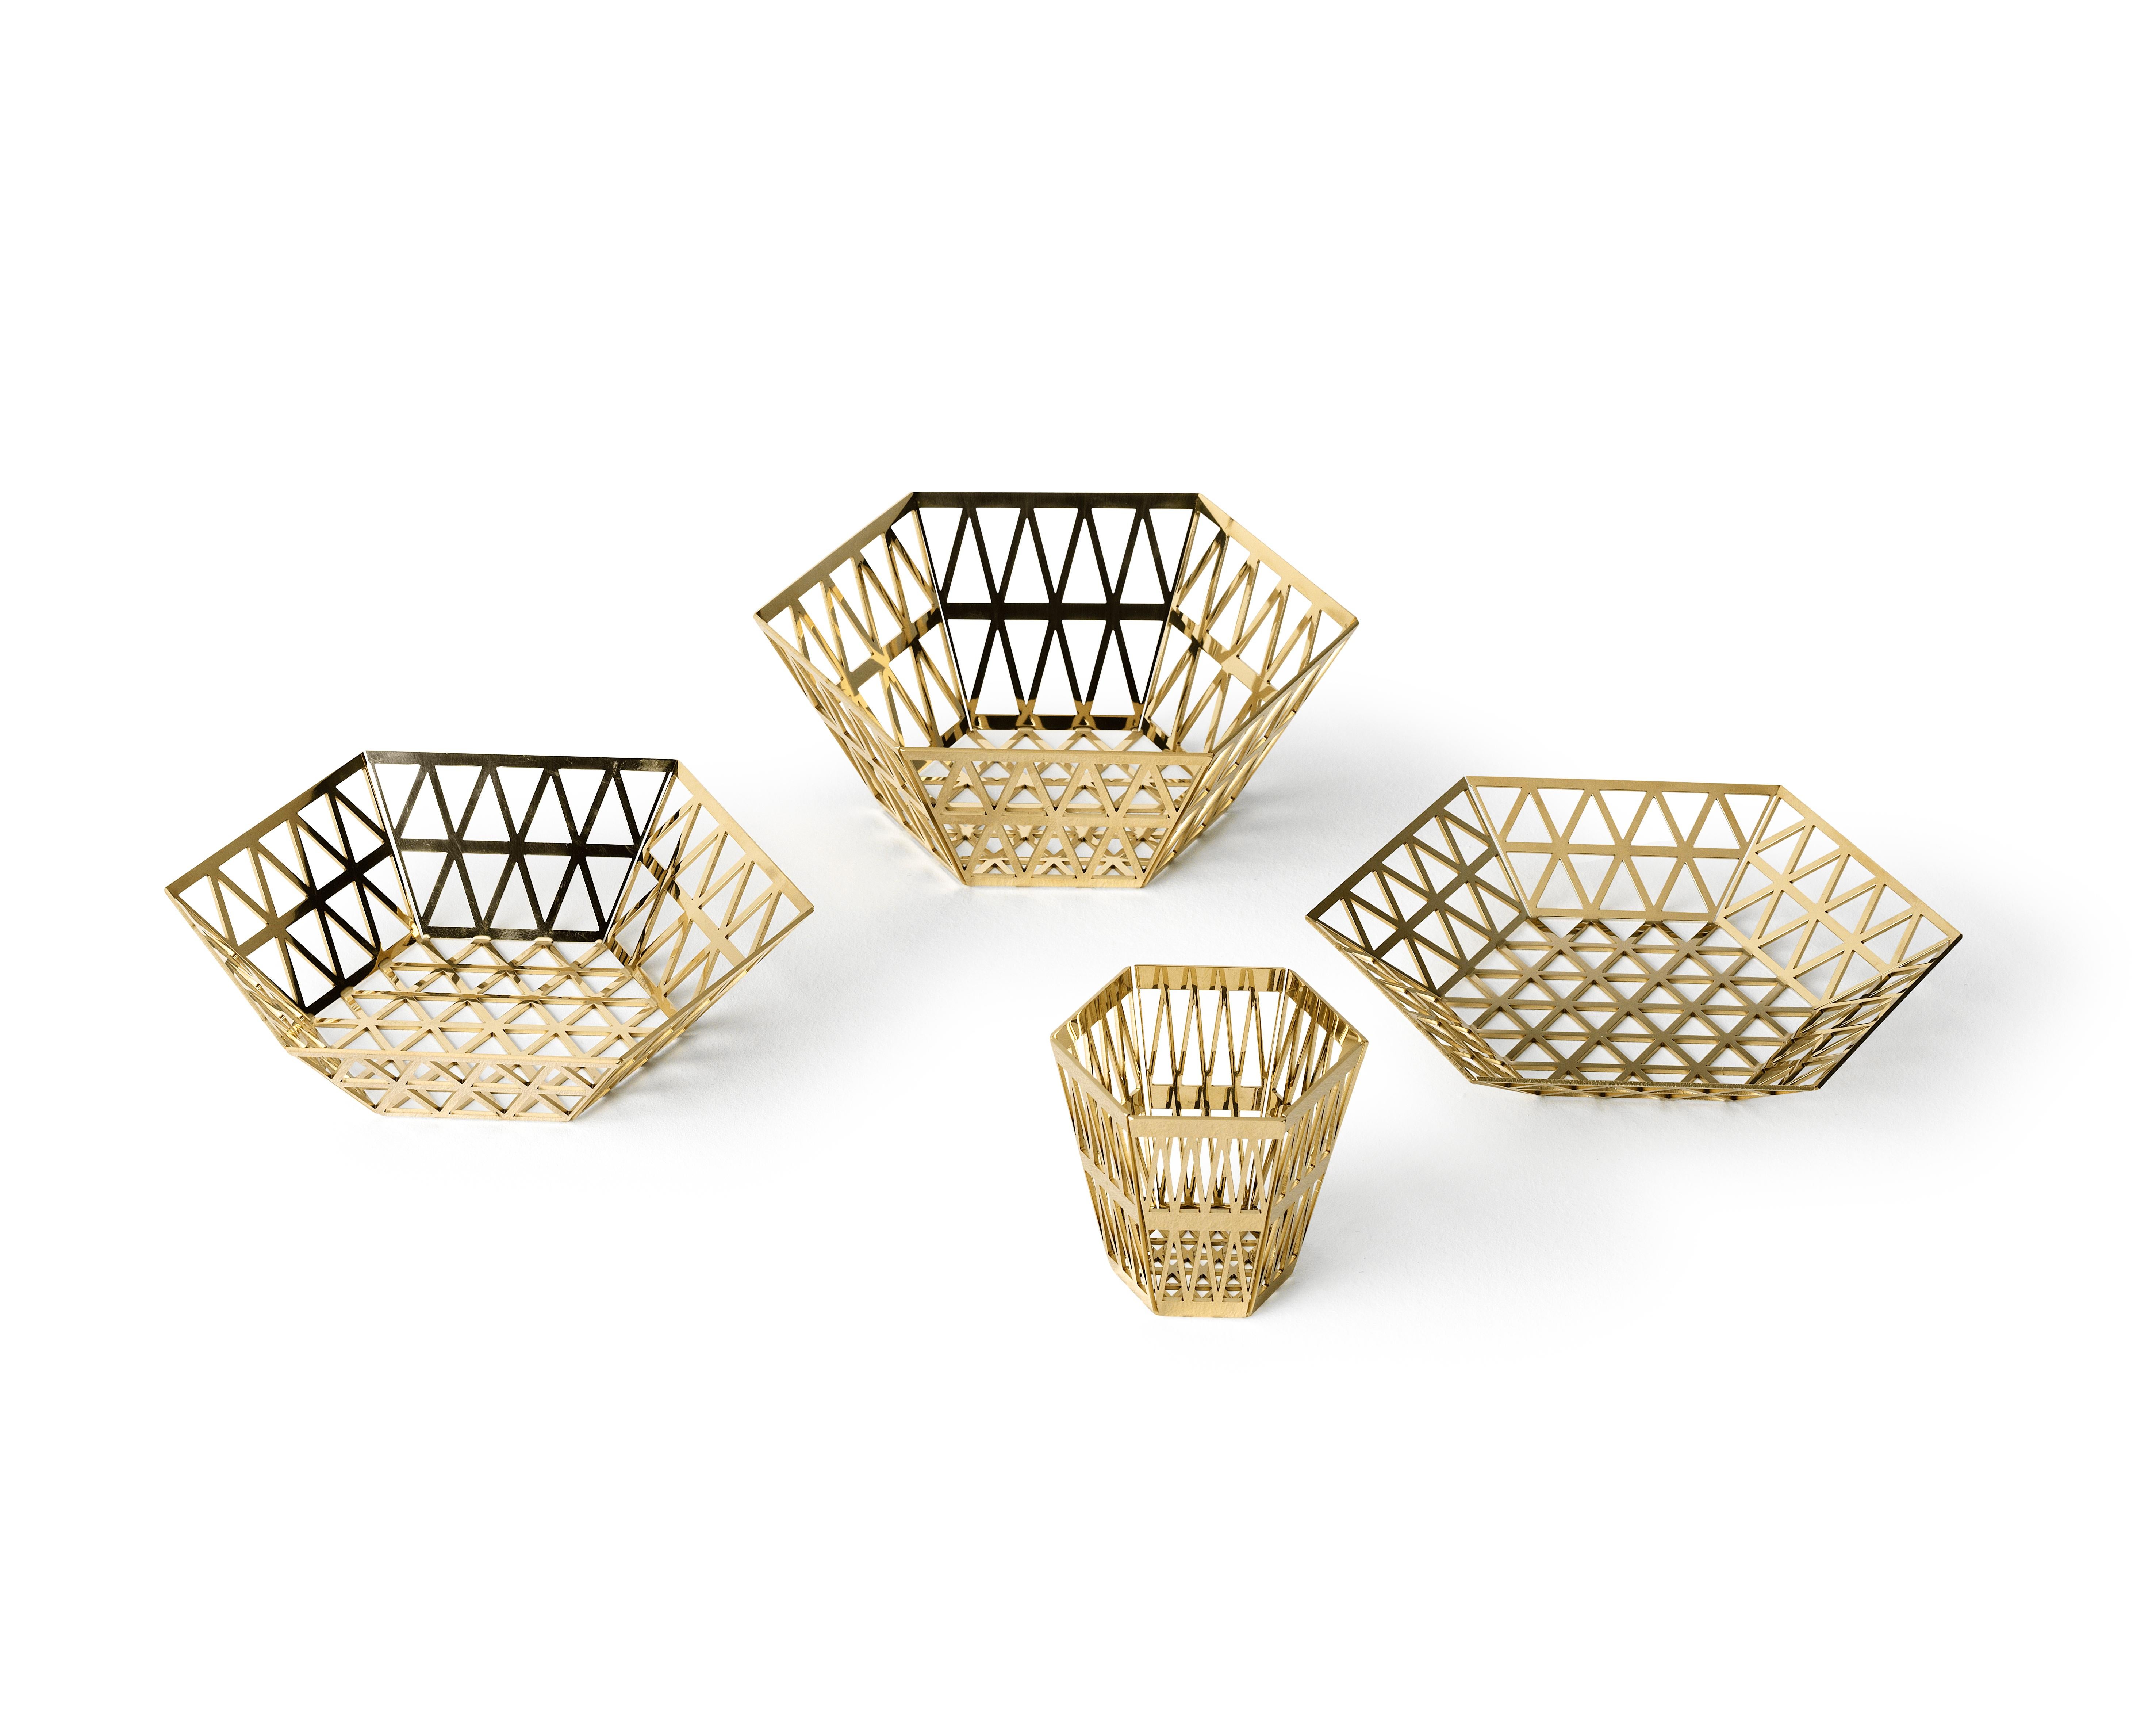 Tray in openwork steel
When you look at the top view of the Tip-Top series, all the triangles have the same size. In 3D these triangles have been stretched, which creates a very surprising hexagonal structure, applied to different